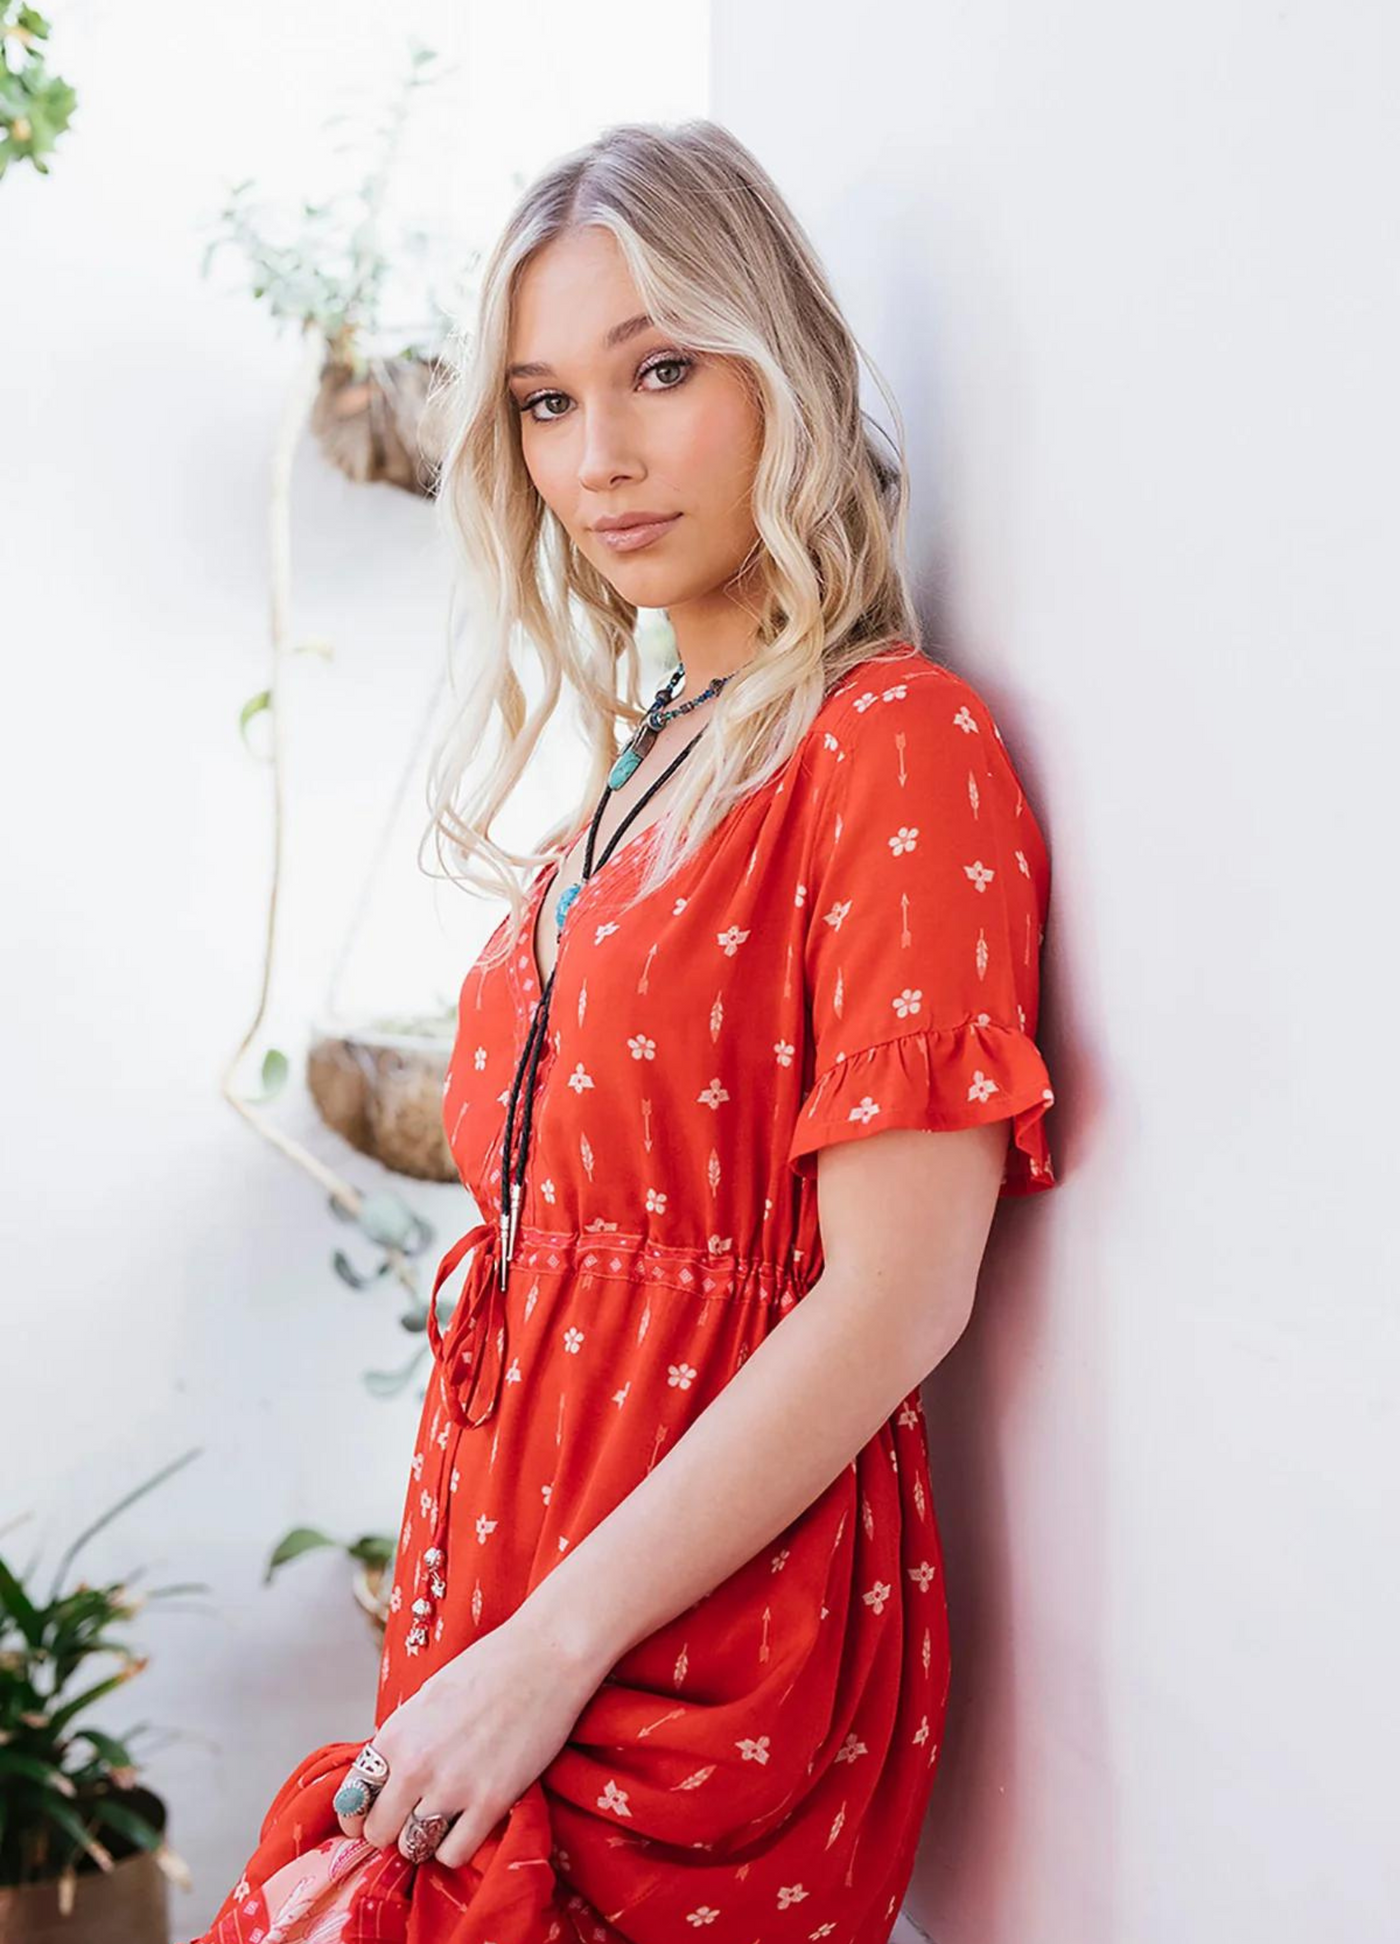 Model wearing a red boho maxi dress with border print at the bottom